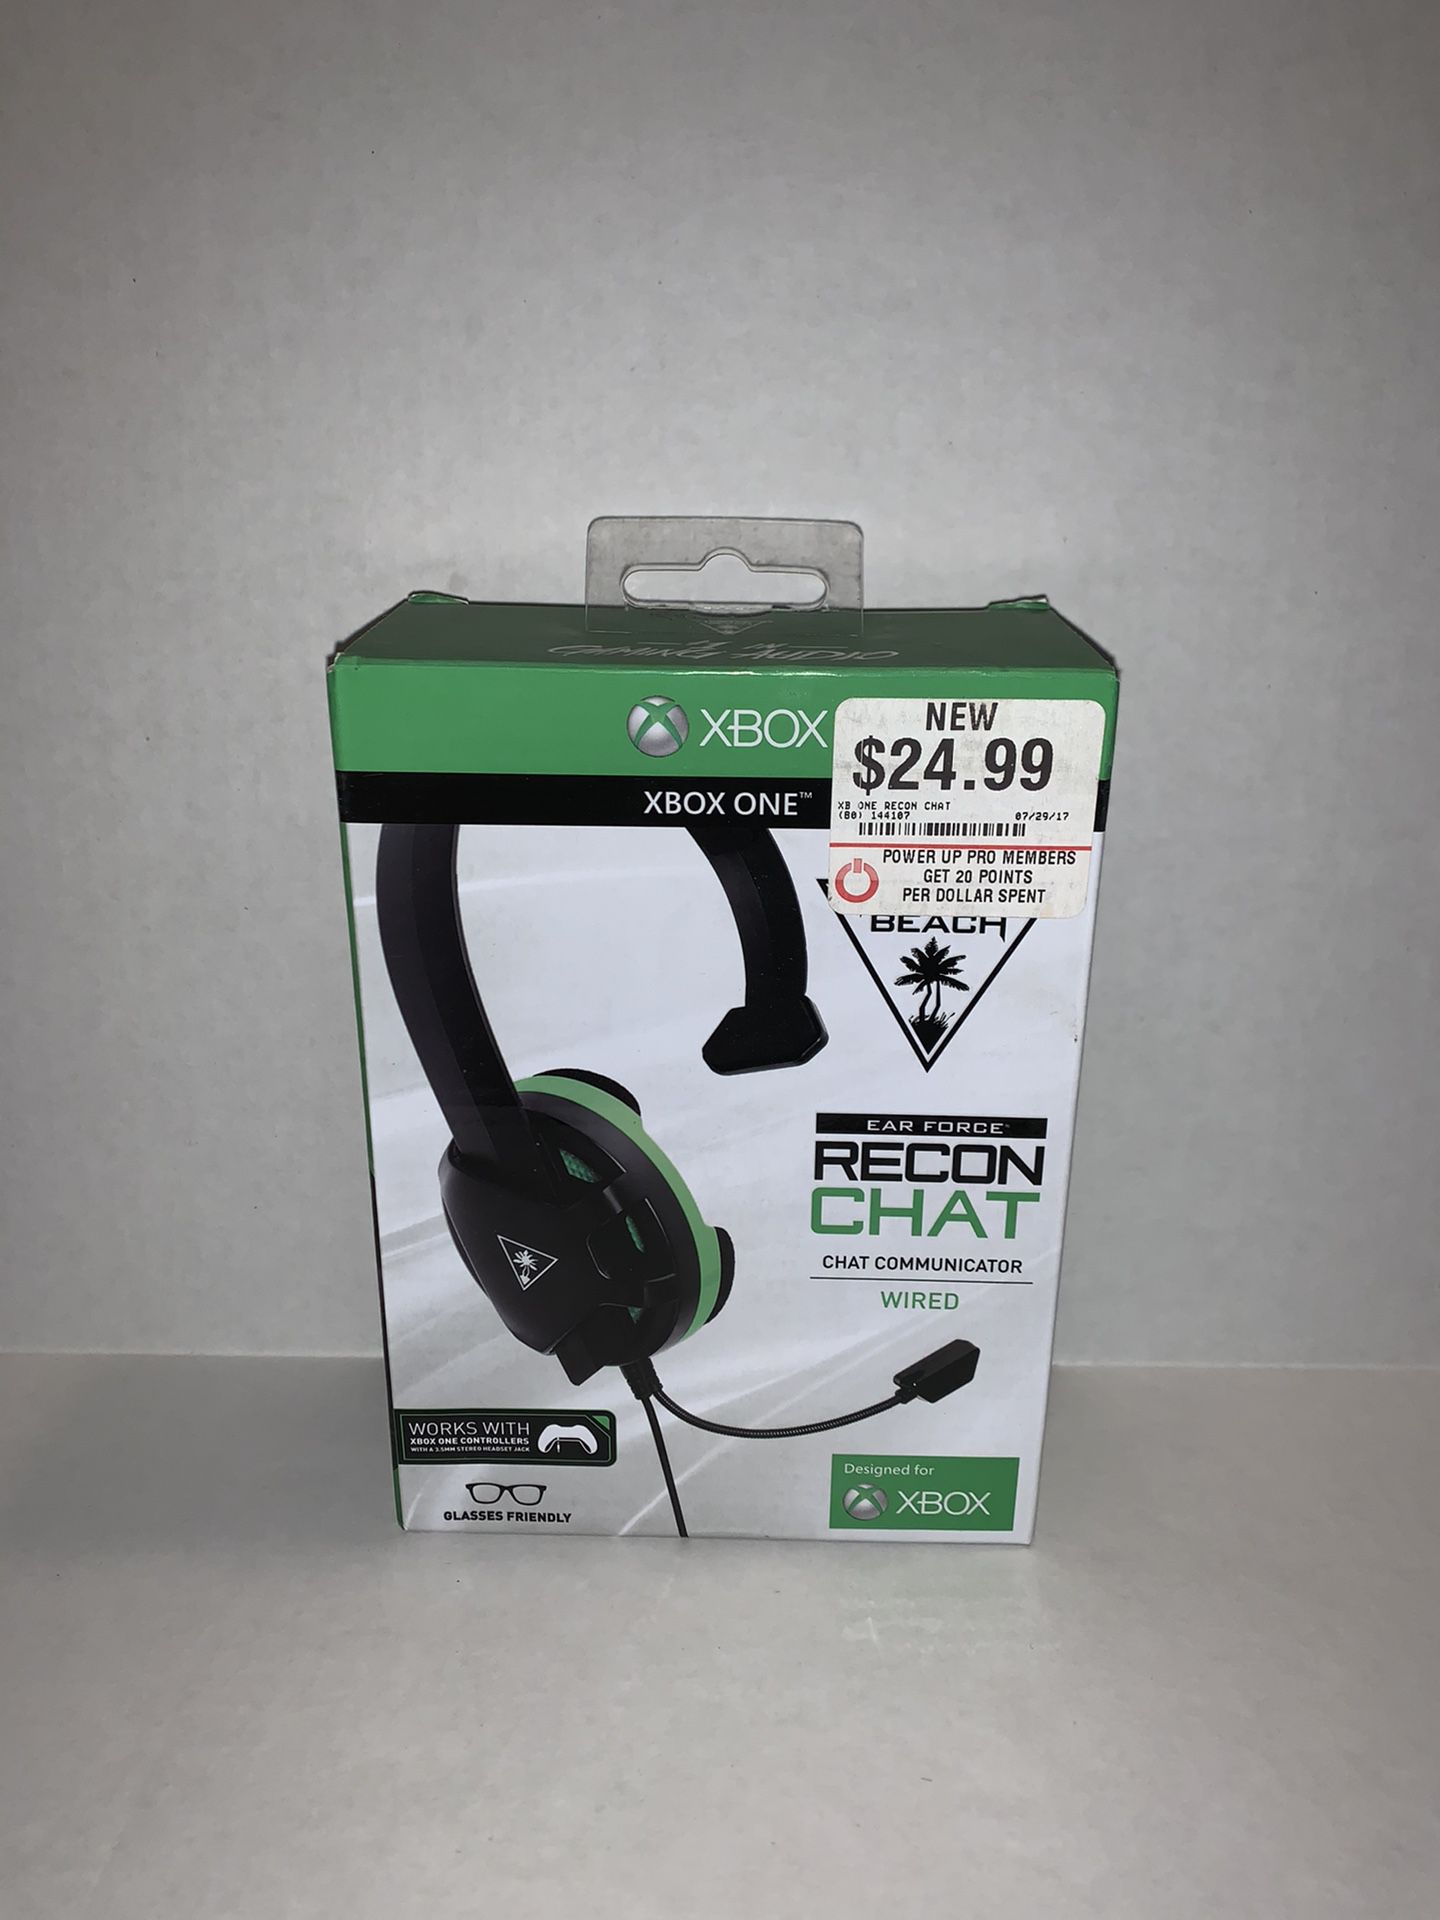 Turtle beach gaming headsets